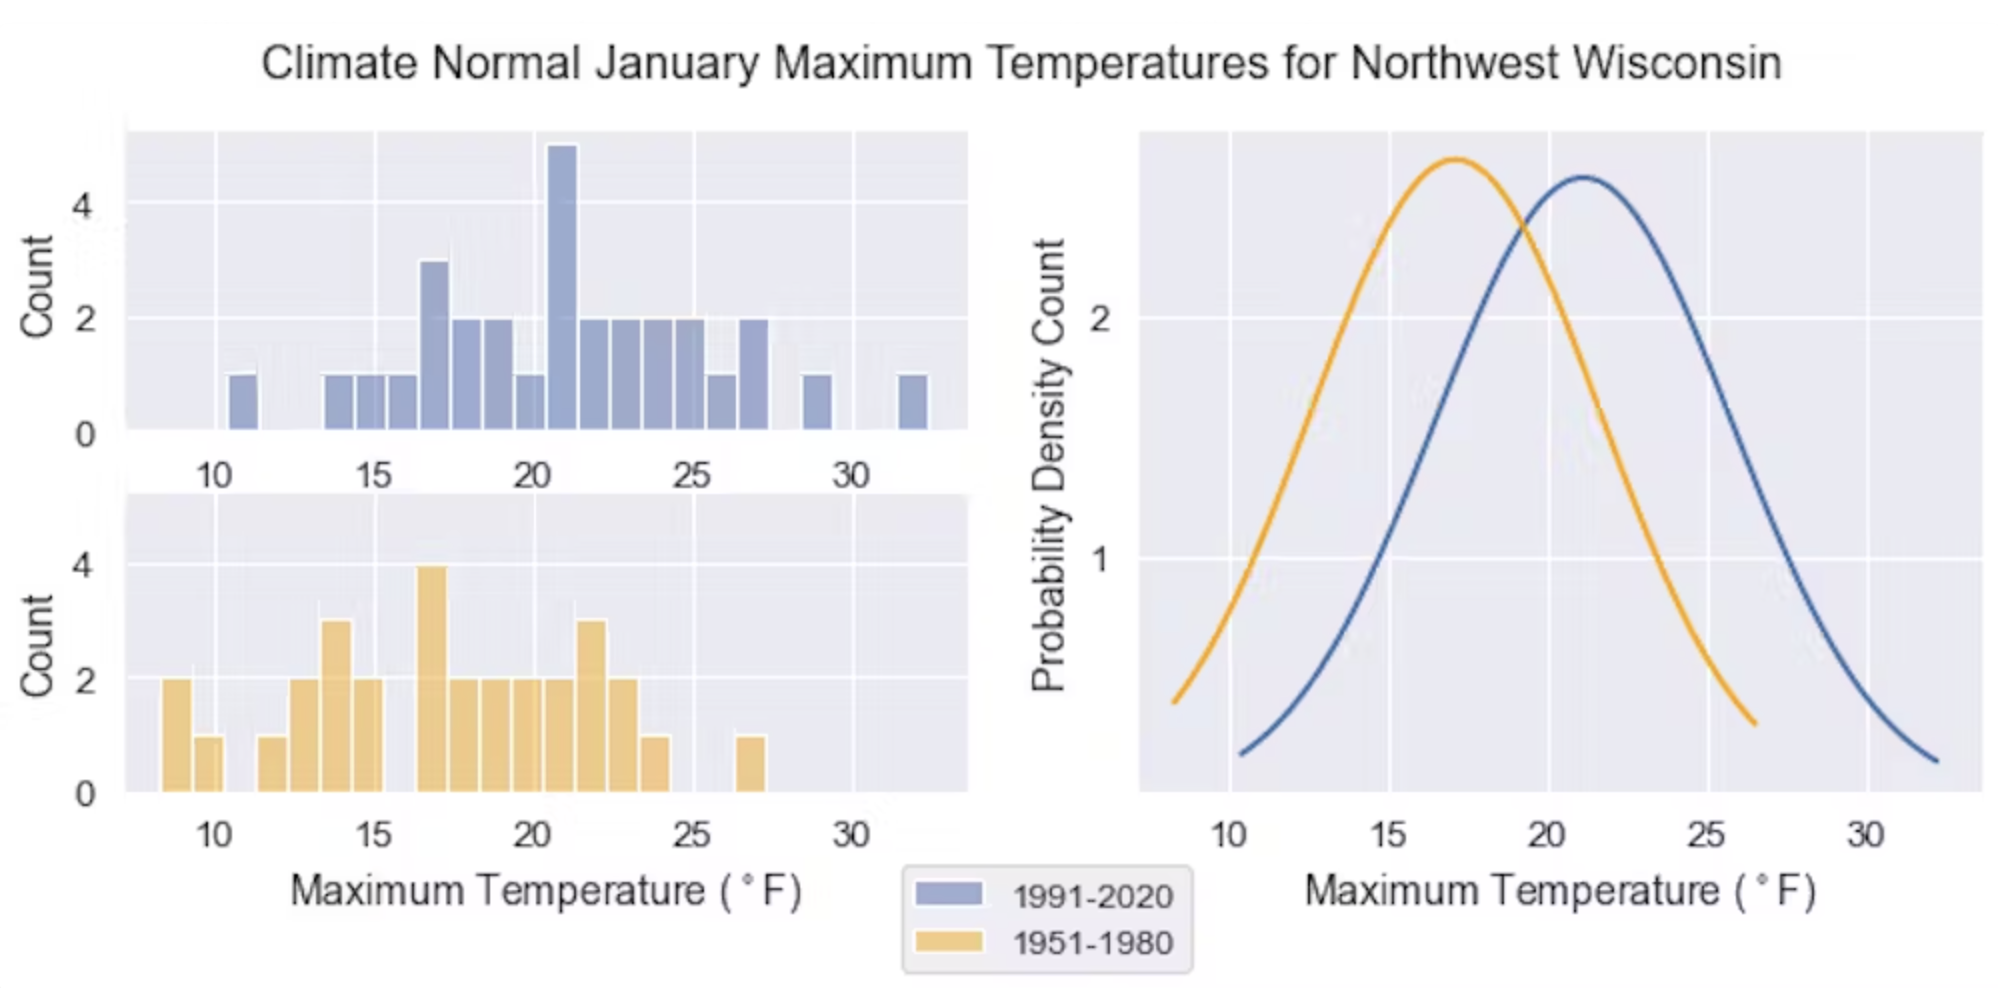 In northwest Wisconsin, along Lake Superior, there were no Januarys in the 1951-1980 time frame in which the average high temperature was even close to exceeded freezing. That has changed in recent years. Omar Gates/GLISA, CC BY-ND